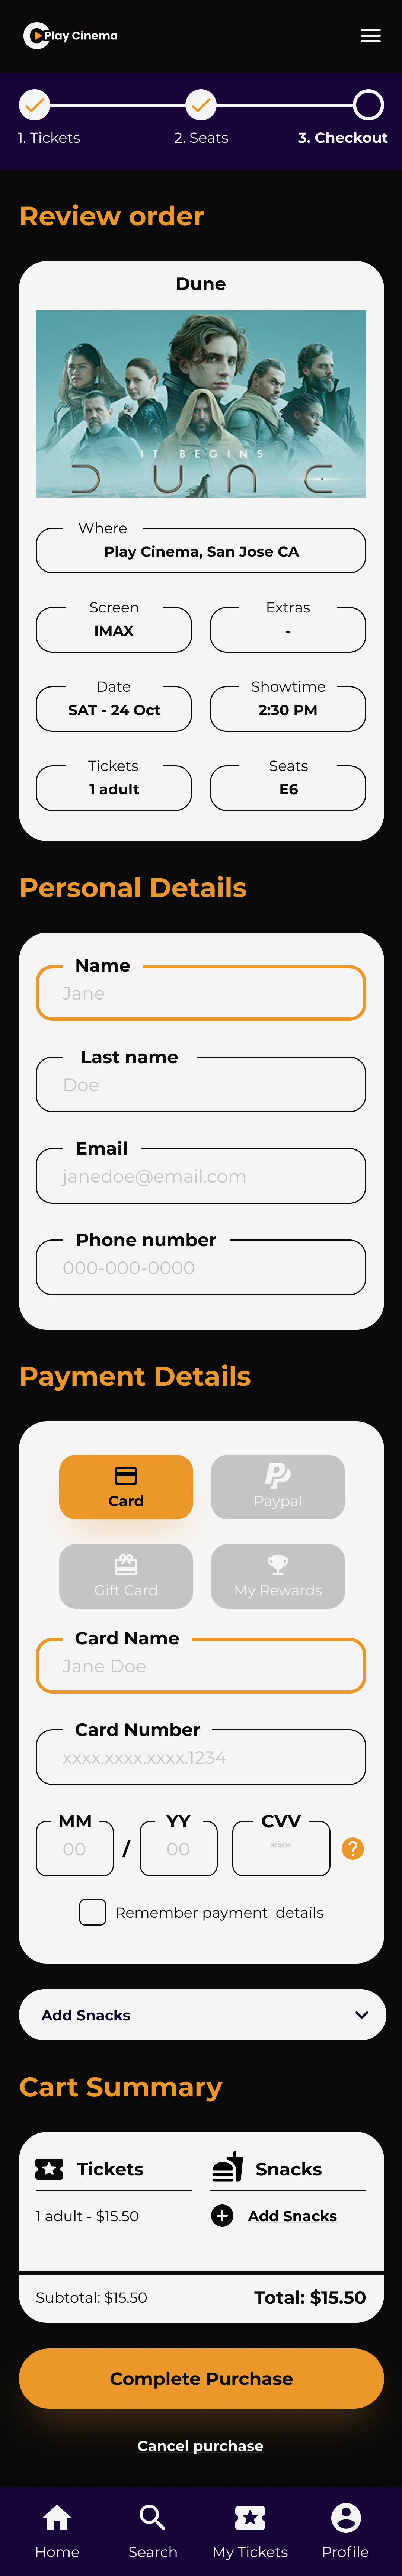 Play Cinema Checkout screen for mobile